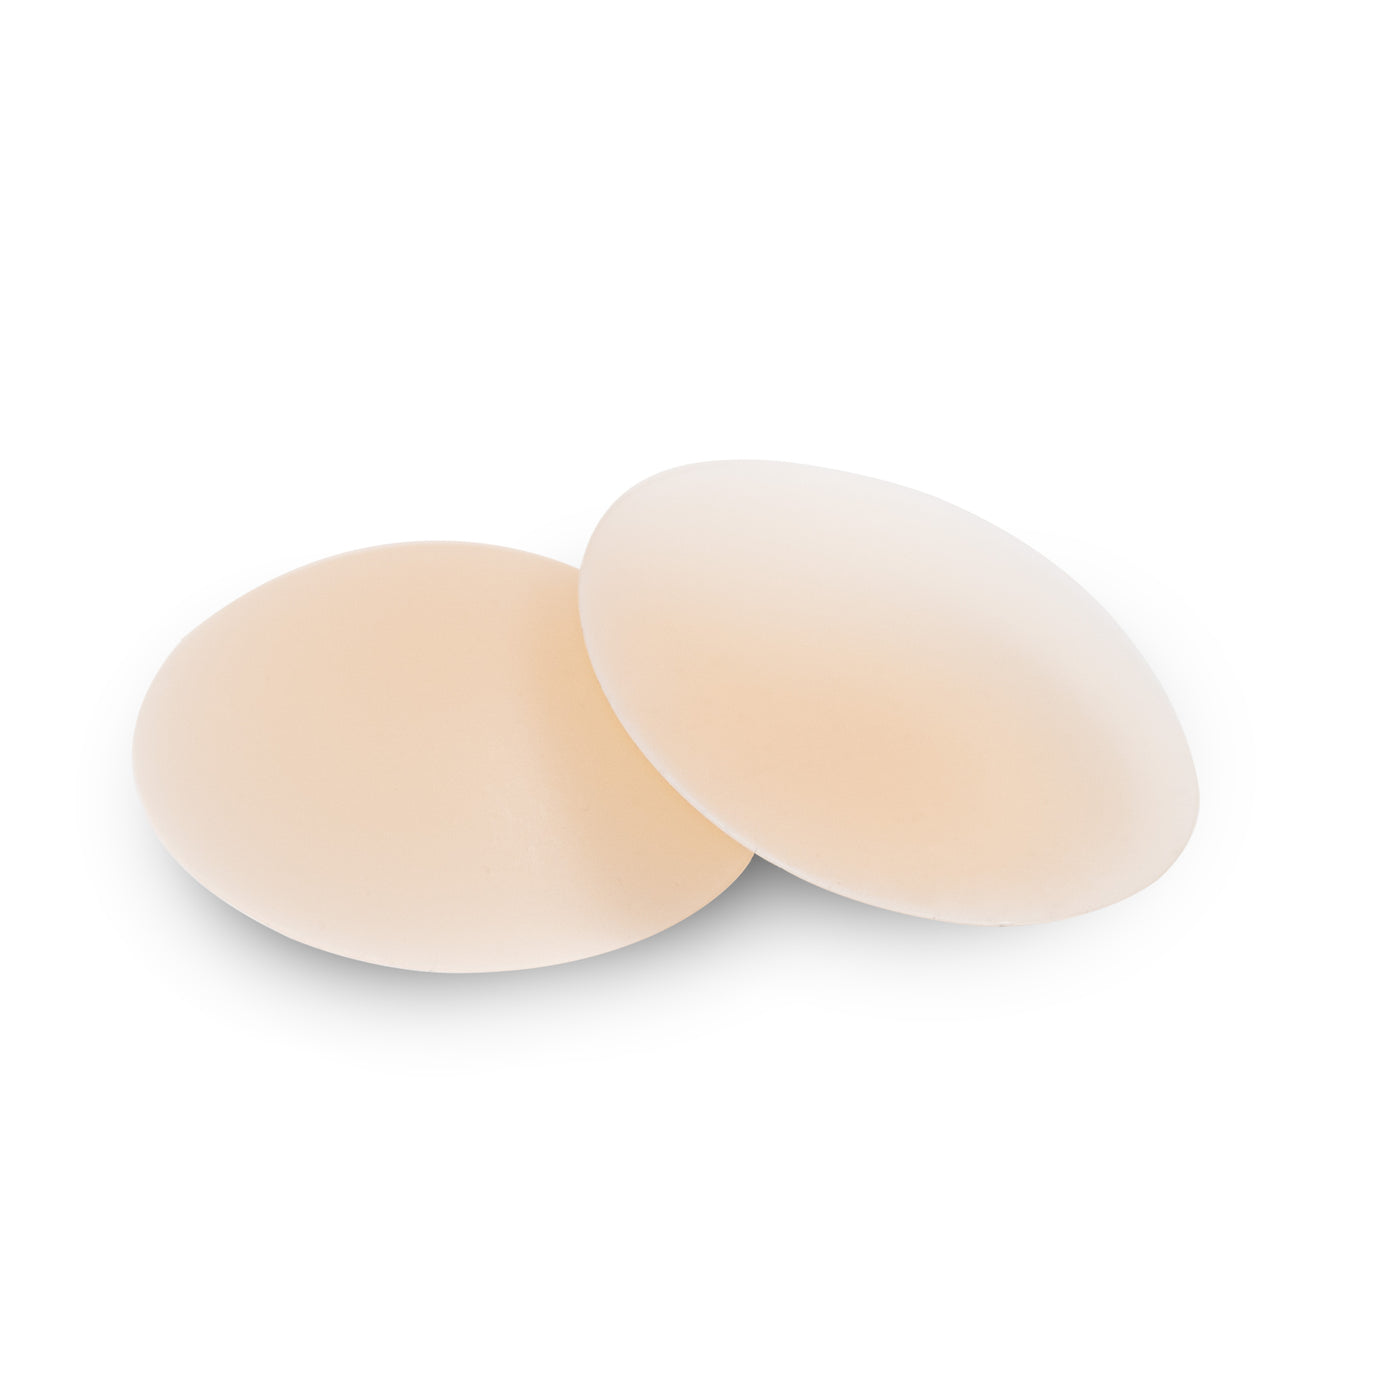 Coverpops | Non - adhesive Nipple Covers, Pasties - Reusable Up to 40 times for all skin tones & sensitive skin